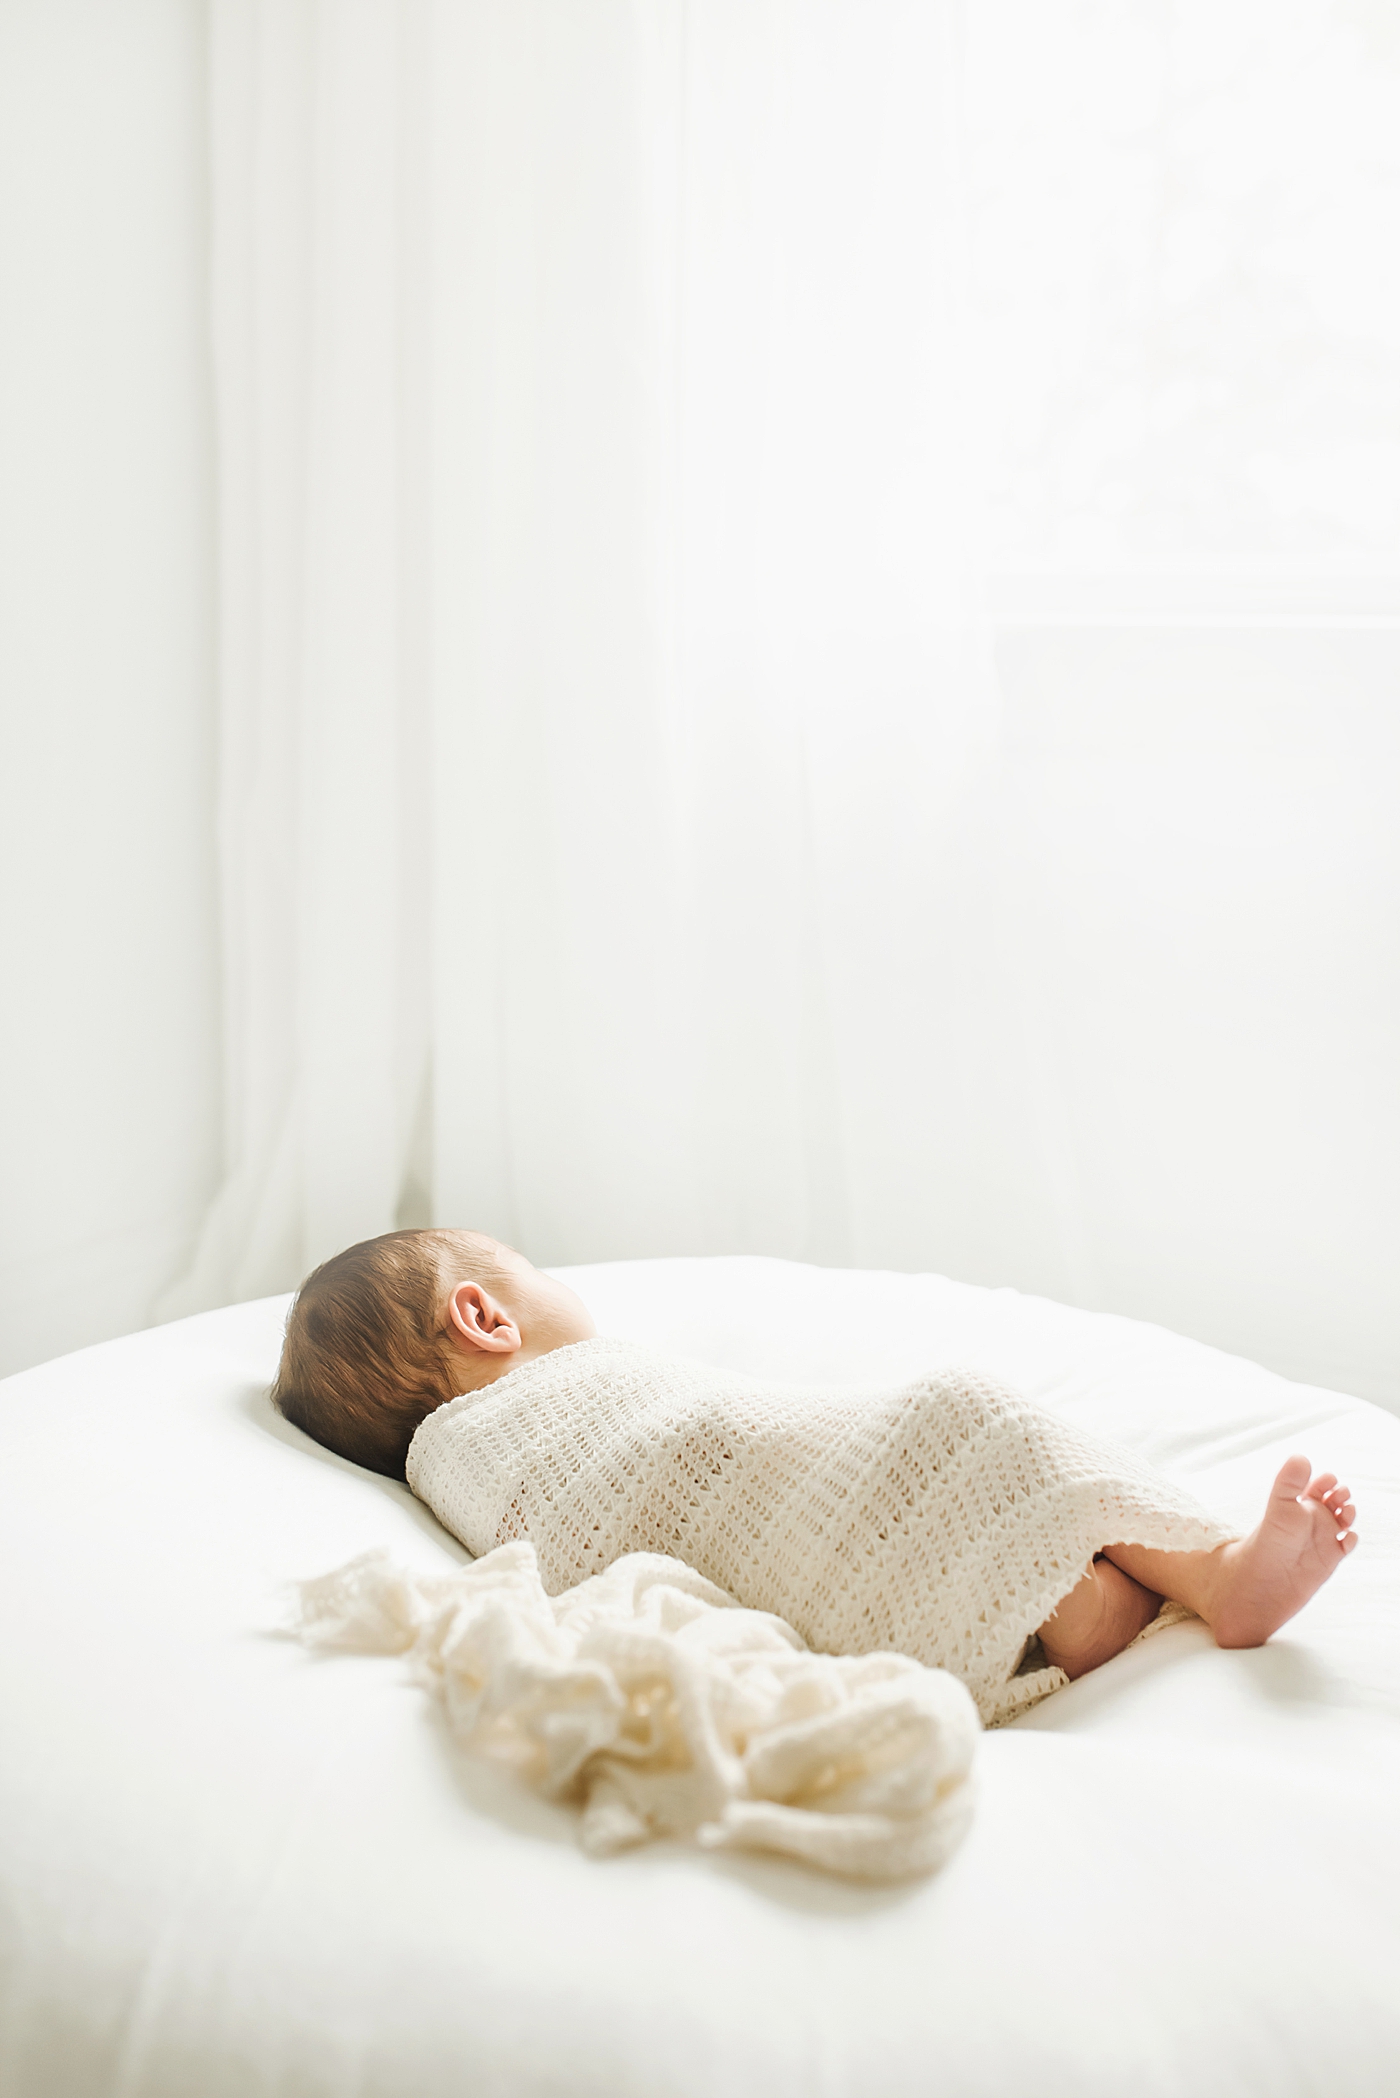 Baby girl sleeping wrapped in a white crochet blanket | Baby photographer in Charlotte Anna Wisjo